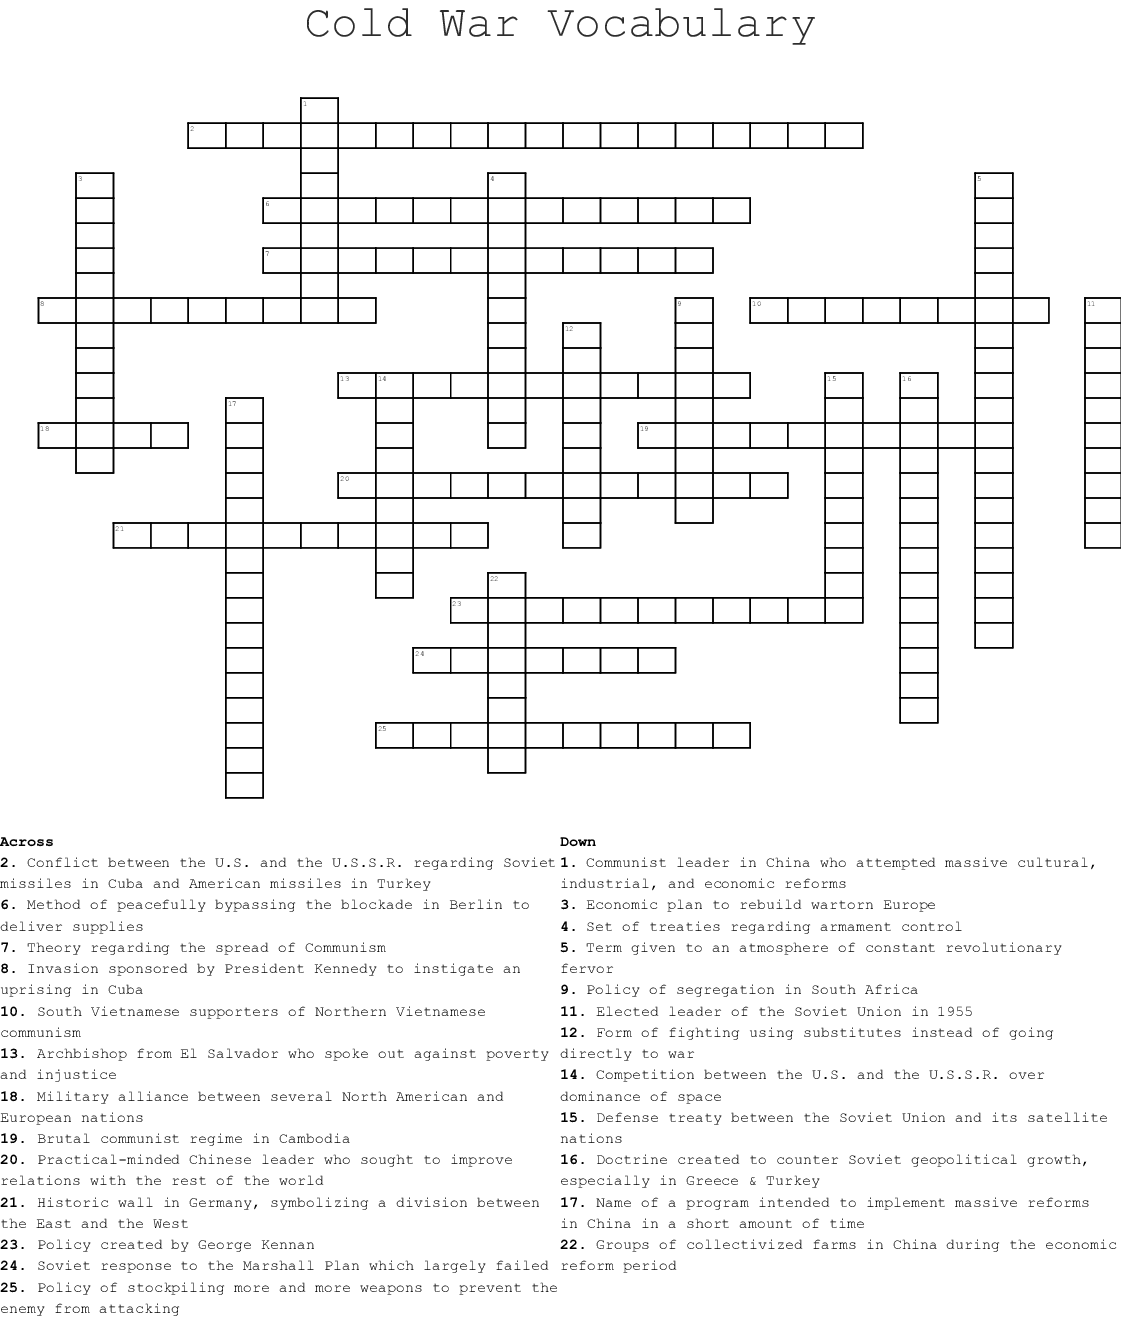 Crossword Puzzle Printable For Kids Cold War Answers